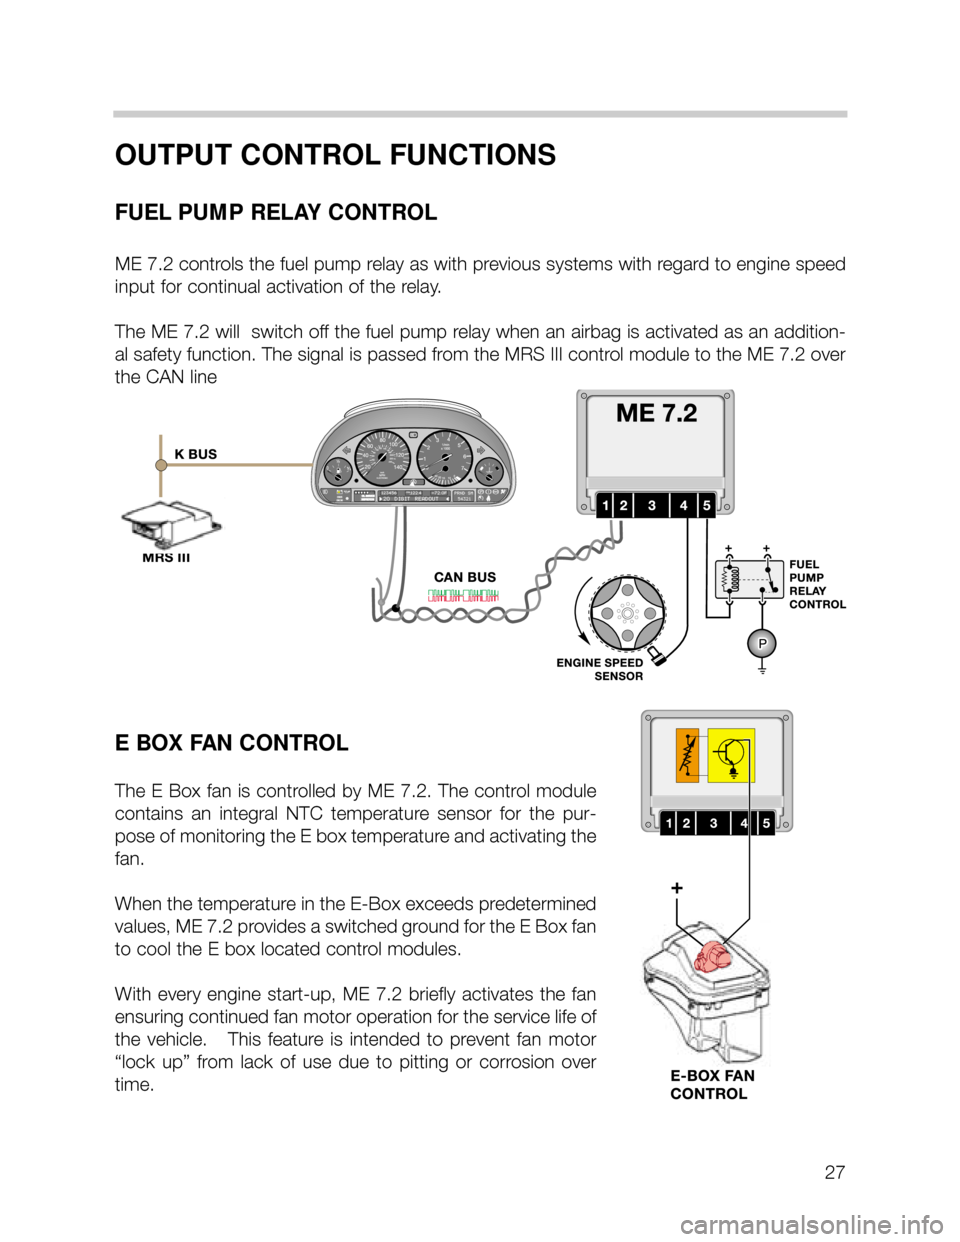 BMW 740i 2000 E38 M62TU Engine User Guide 27
OUTPUT CONTROL FUNCTIONS
FUEL PUMP RELAY CONTROL
ME 7.2 controls the fuel pump relay as with previous systems with regard to engine speed
input for continual activation of the relay.  
The ME 7.2 w